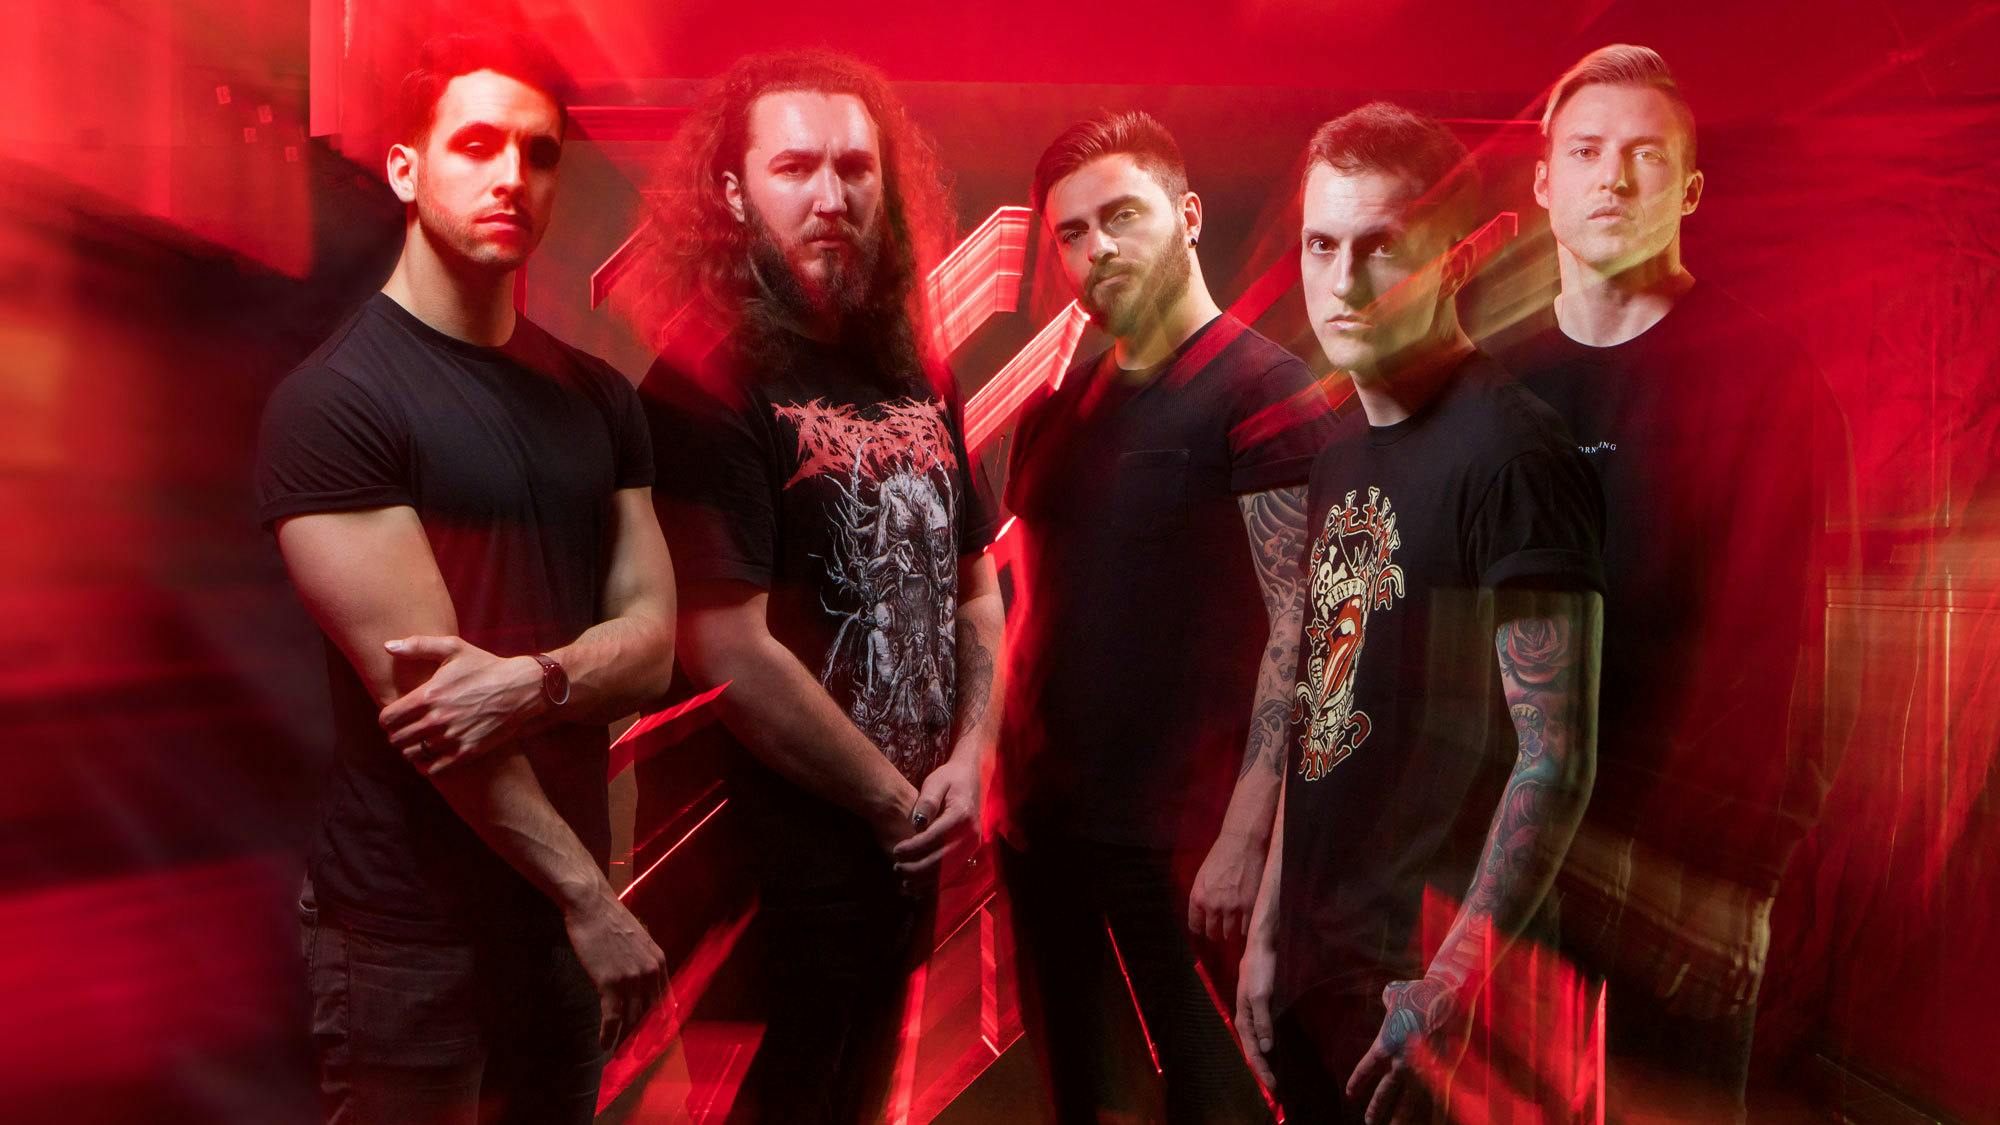 I Prevail Release New Video For Paranoid, Announce UK Tour